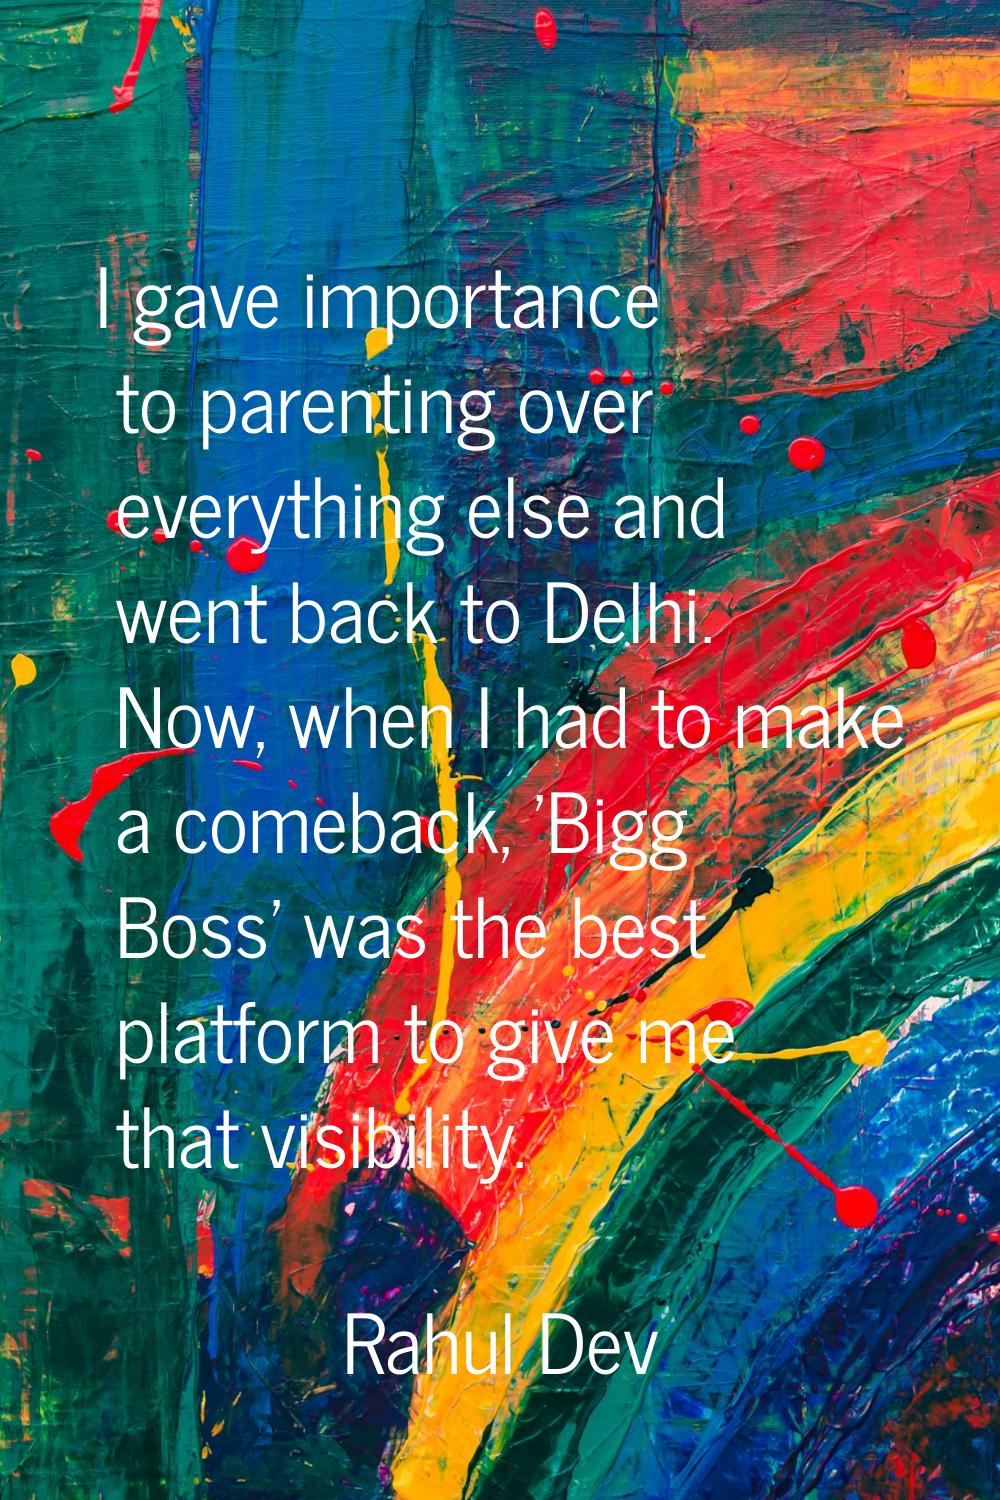 I gave importance to parenting over everything else and went back to Delhi. Now, when I had to make